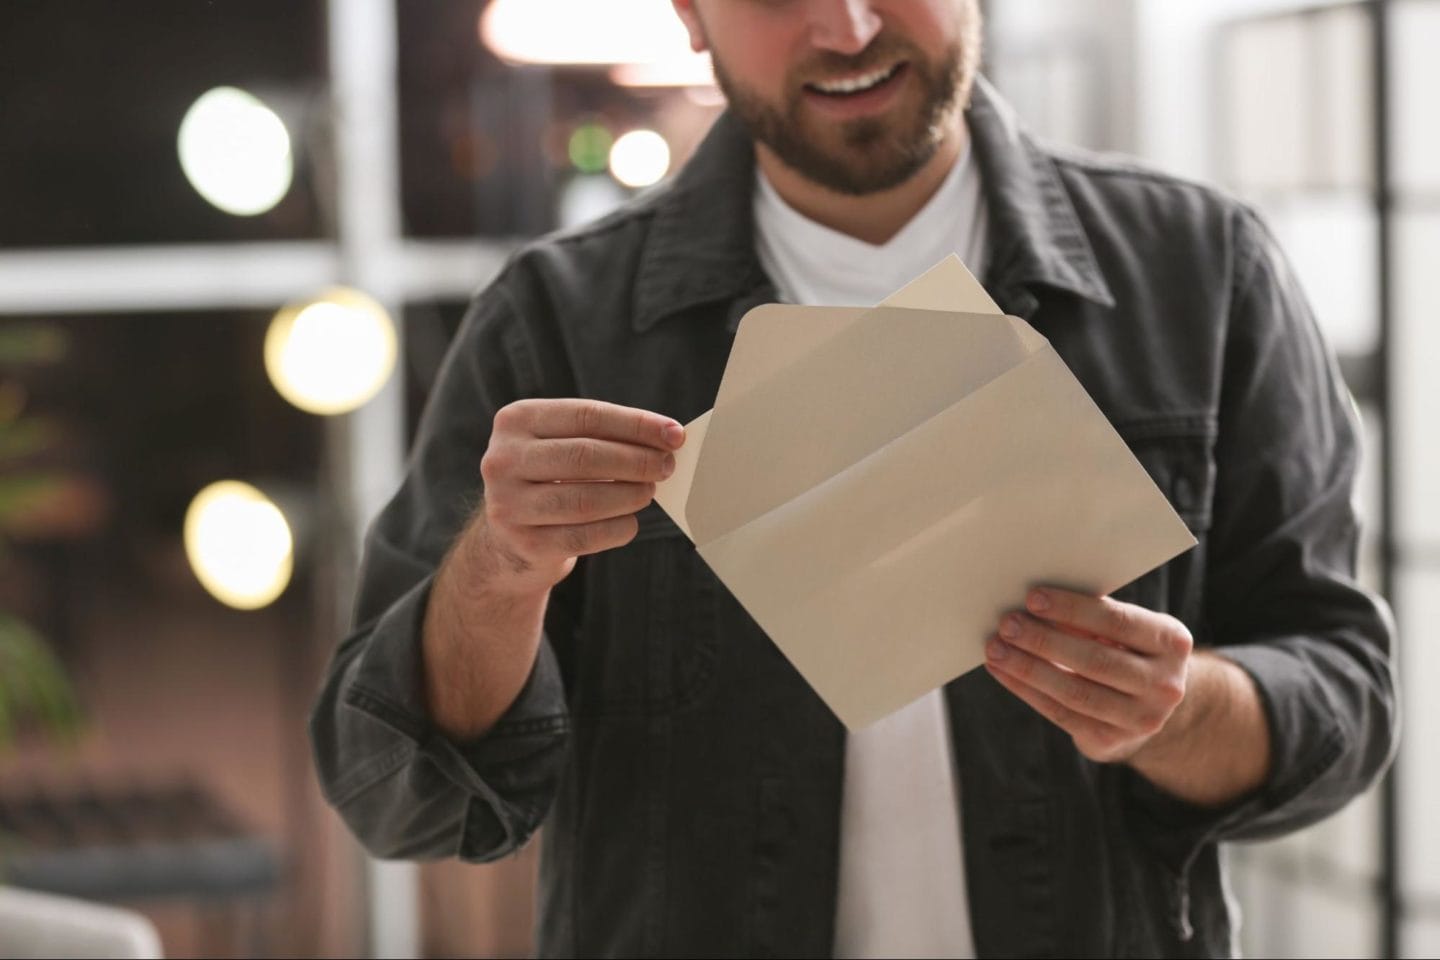 A picture of a man opening an envelope and taking out a letter.